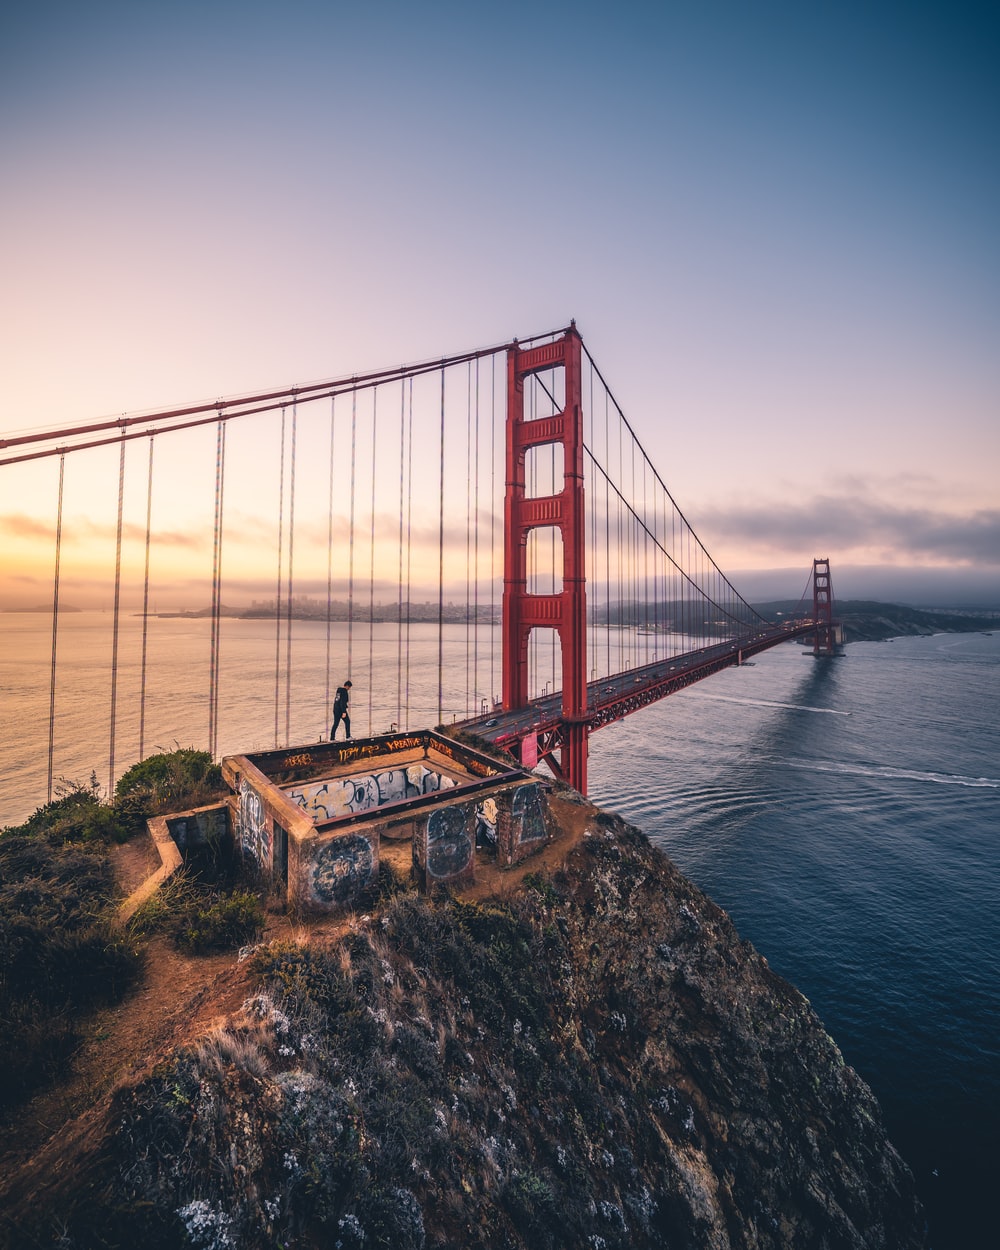 Iphone Xs Max San Francisco Images Wallpapers